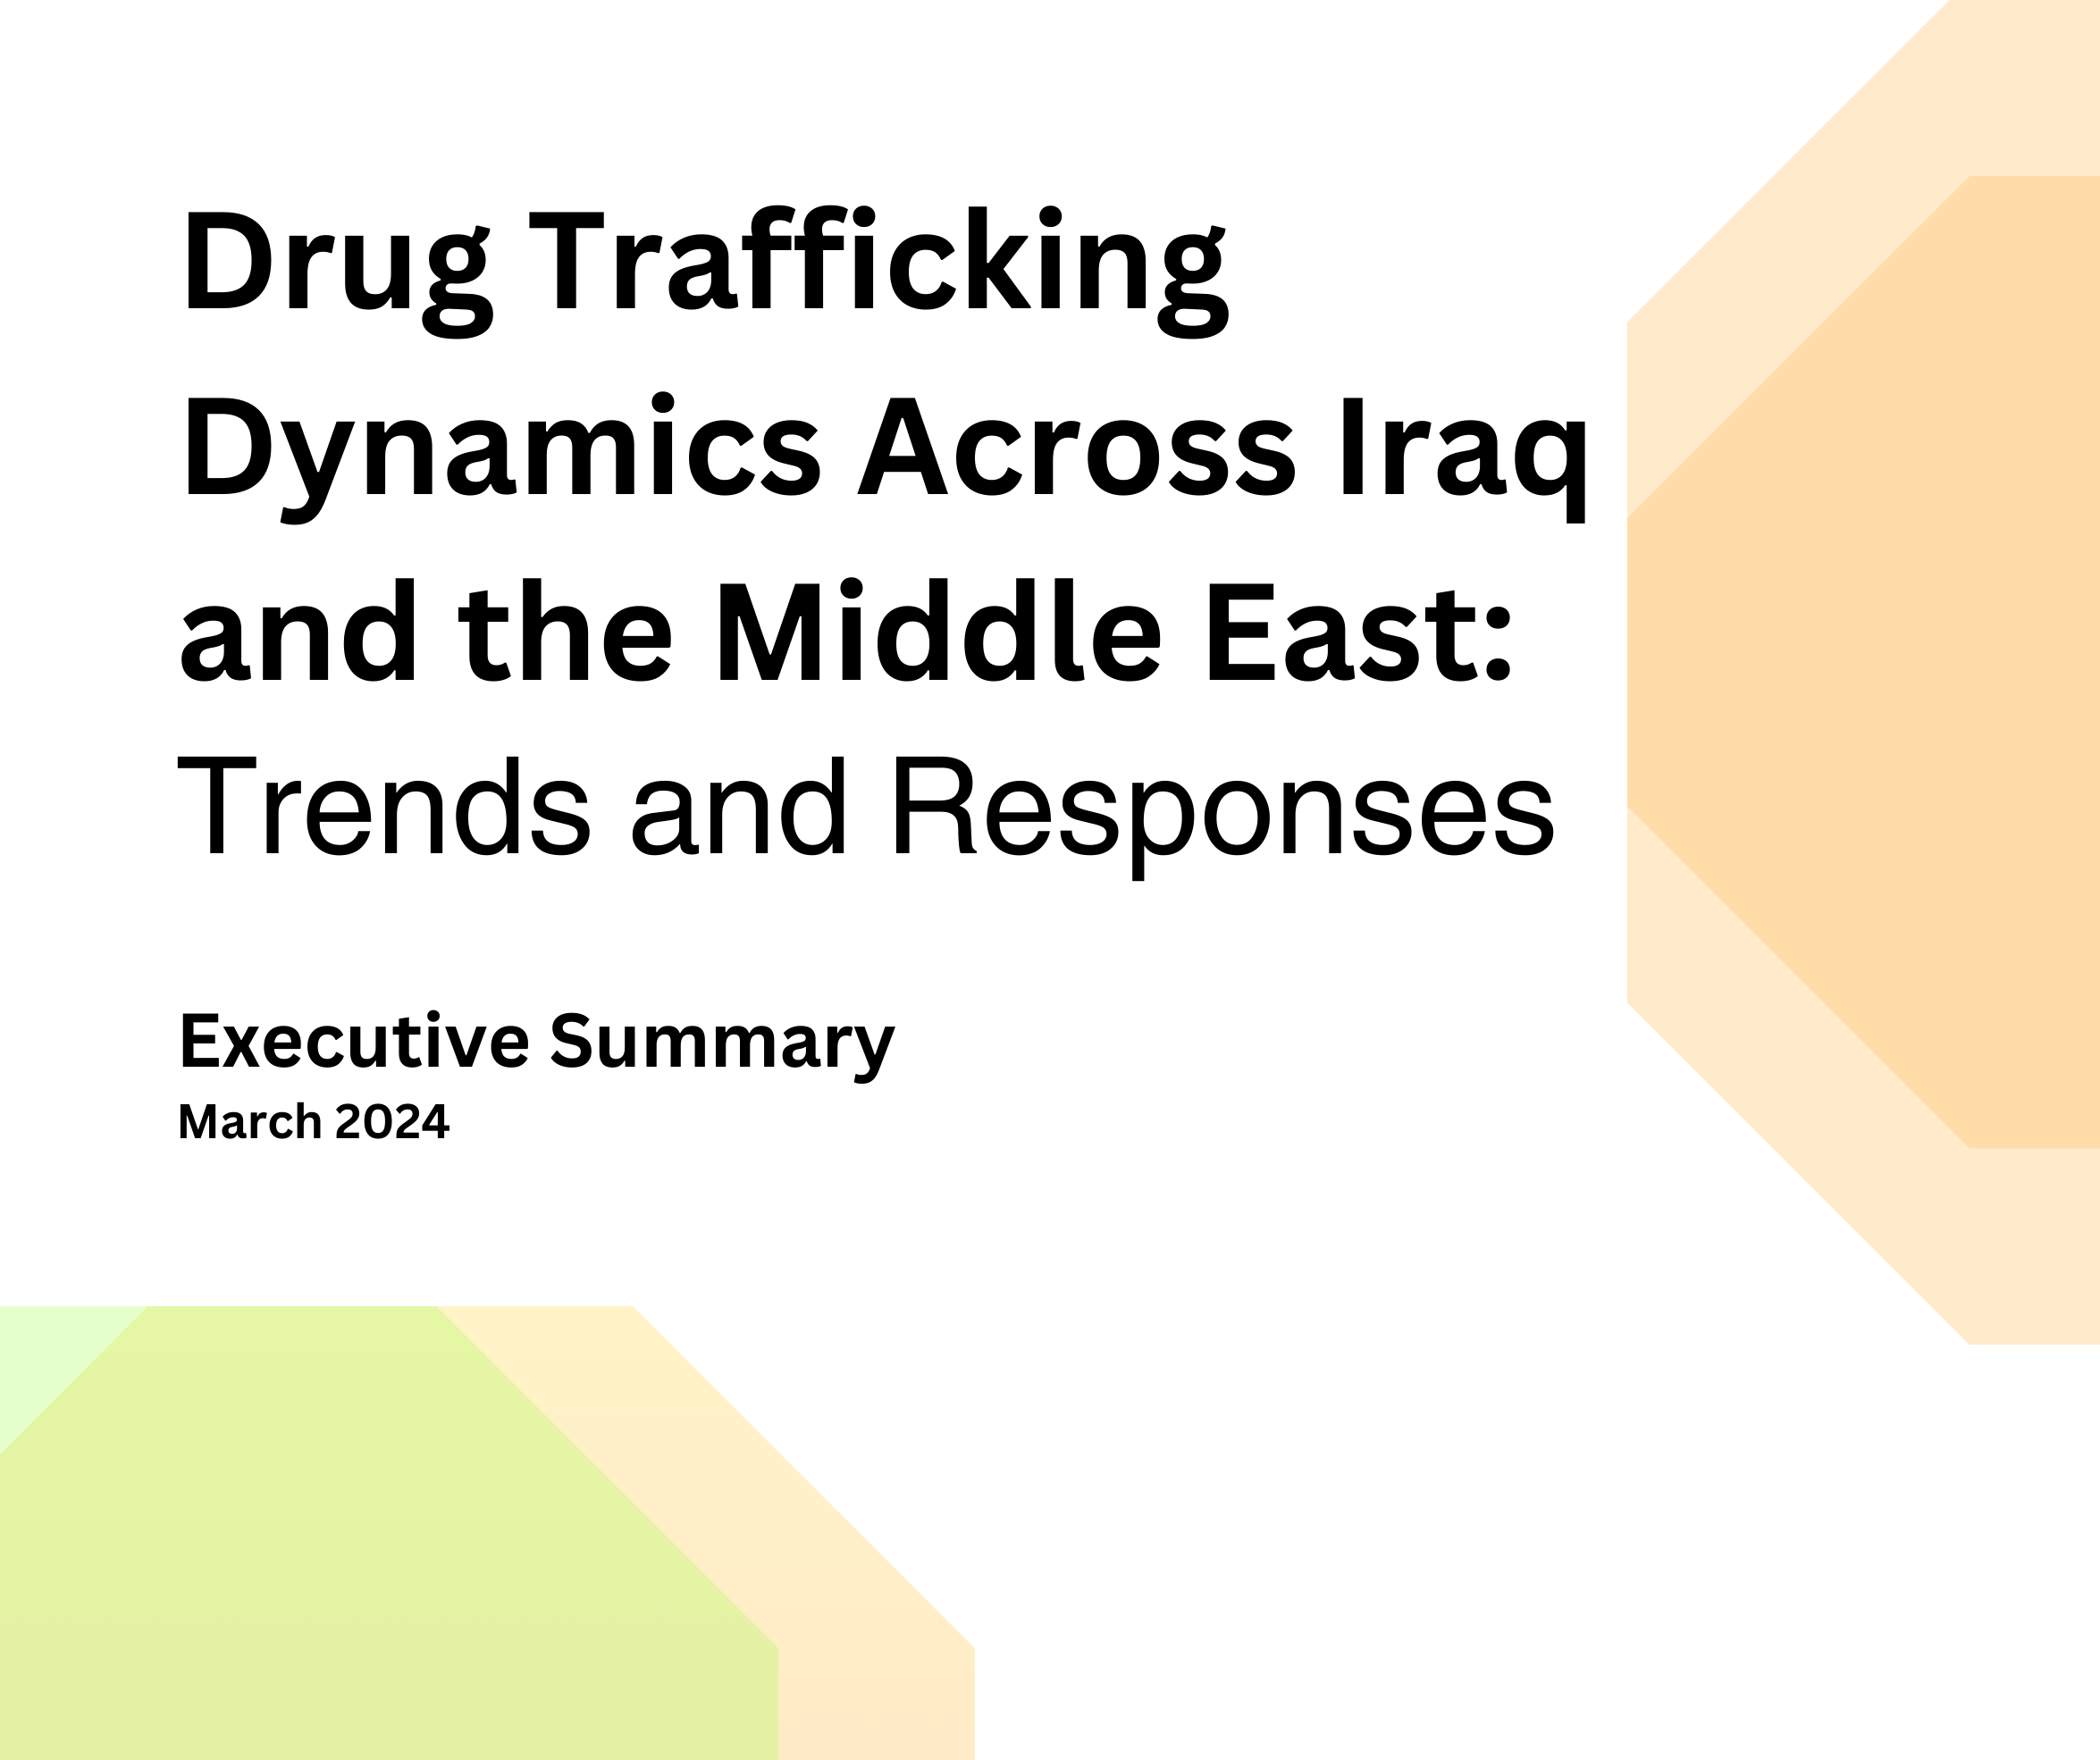 Drug Trafficking Dynamics Across Iraq and the Middle East (2019–2023): Trends and Responses 